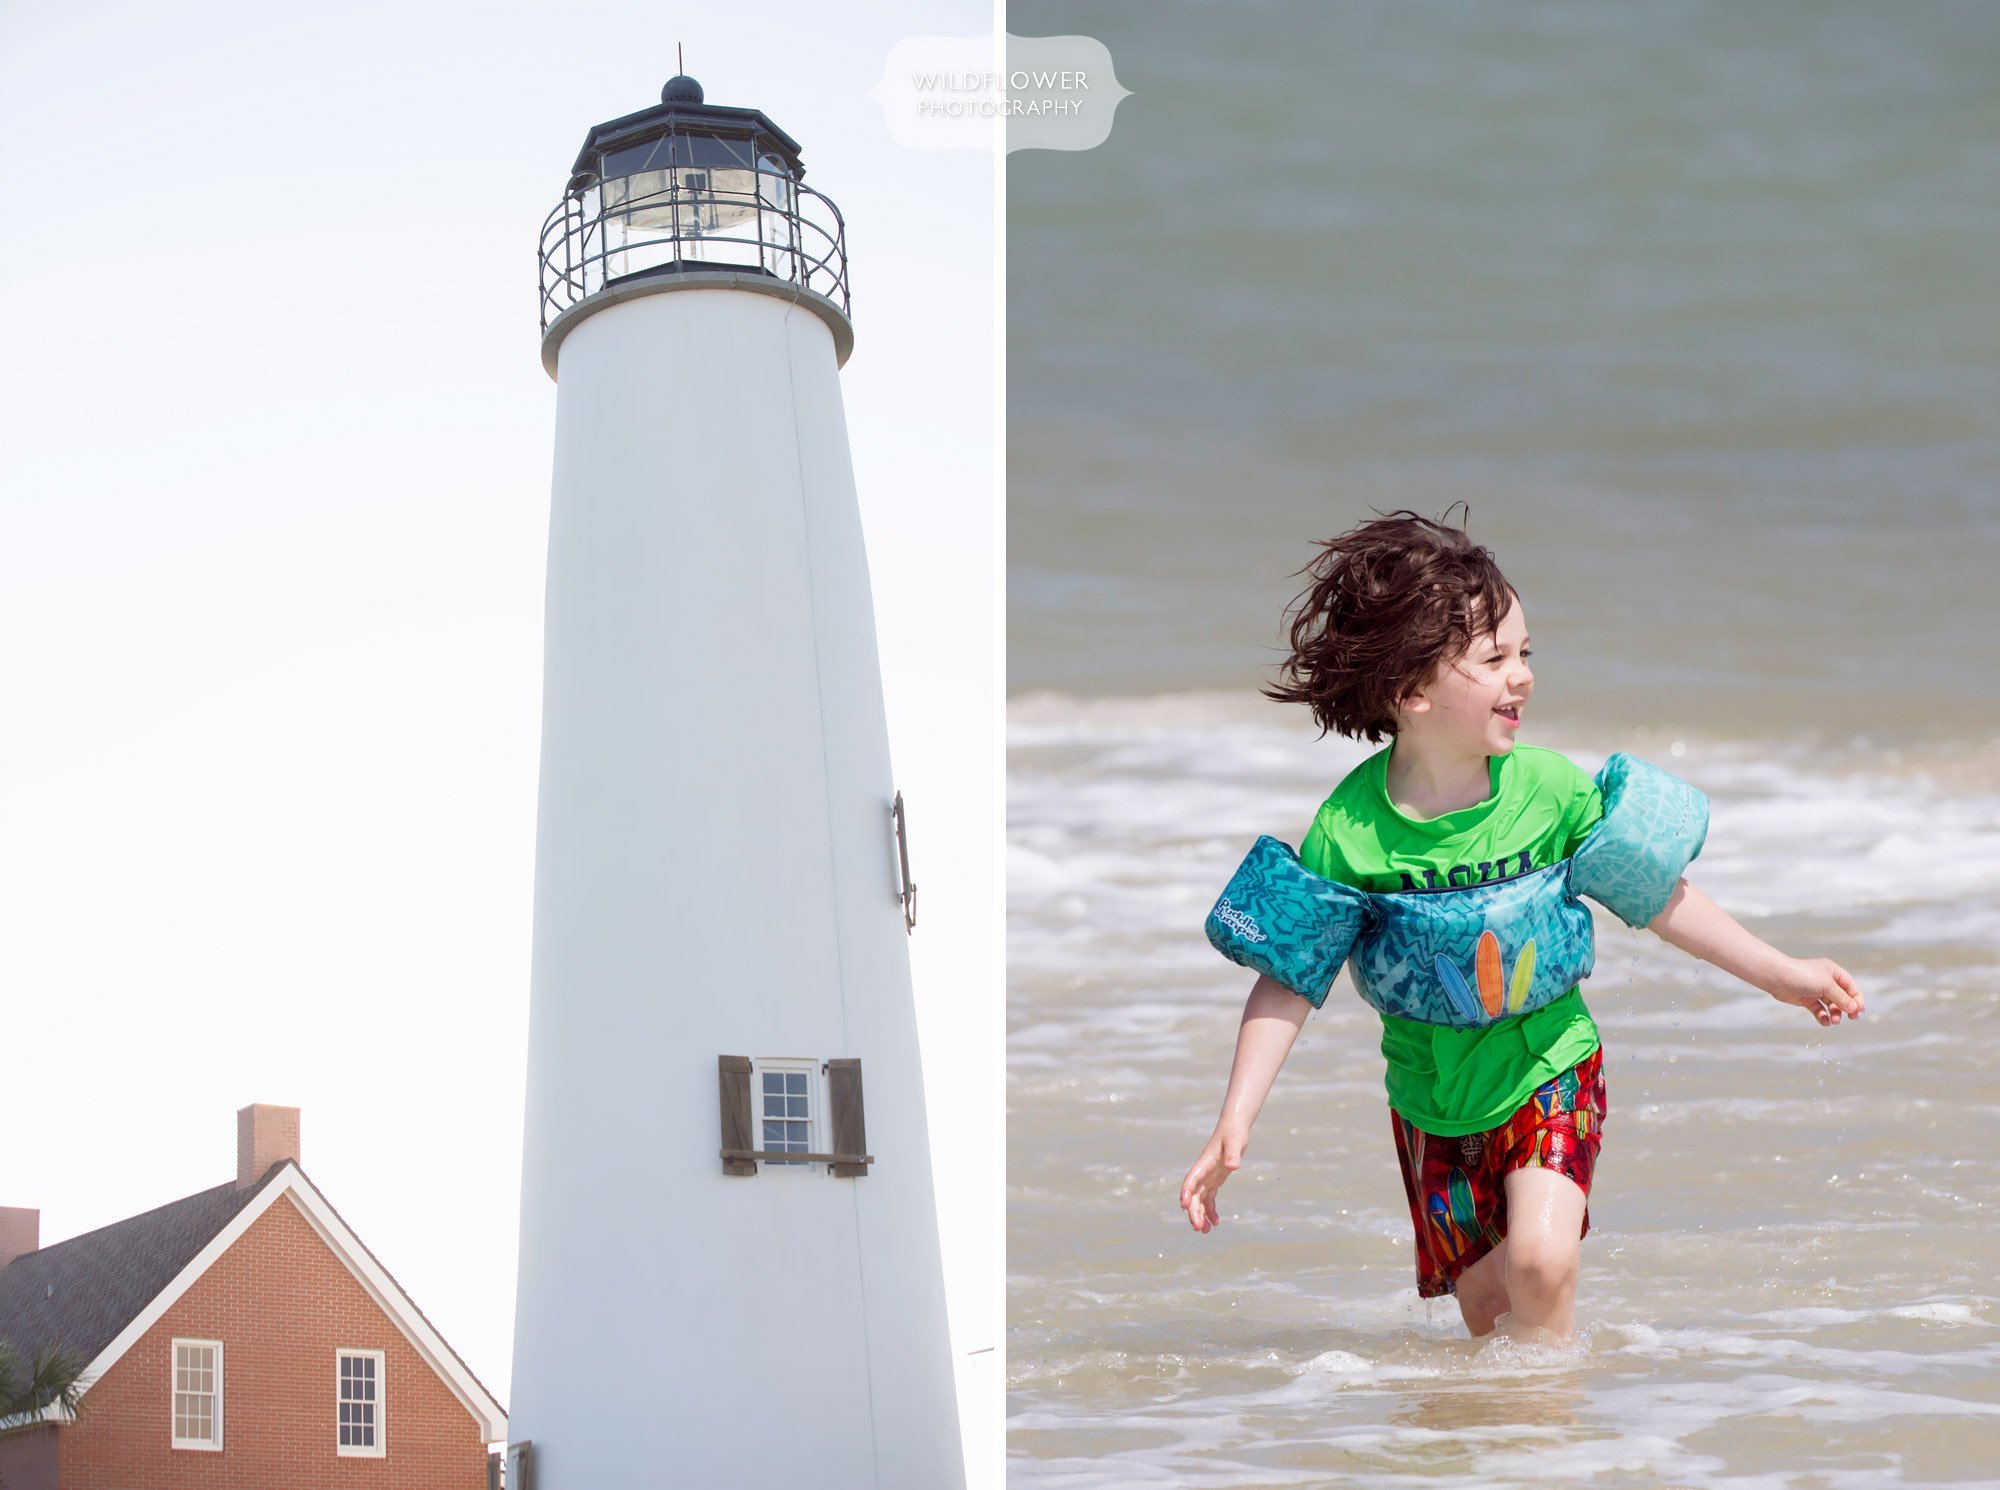 St. George Island lighthouse with boy running in water.